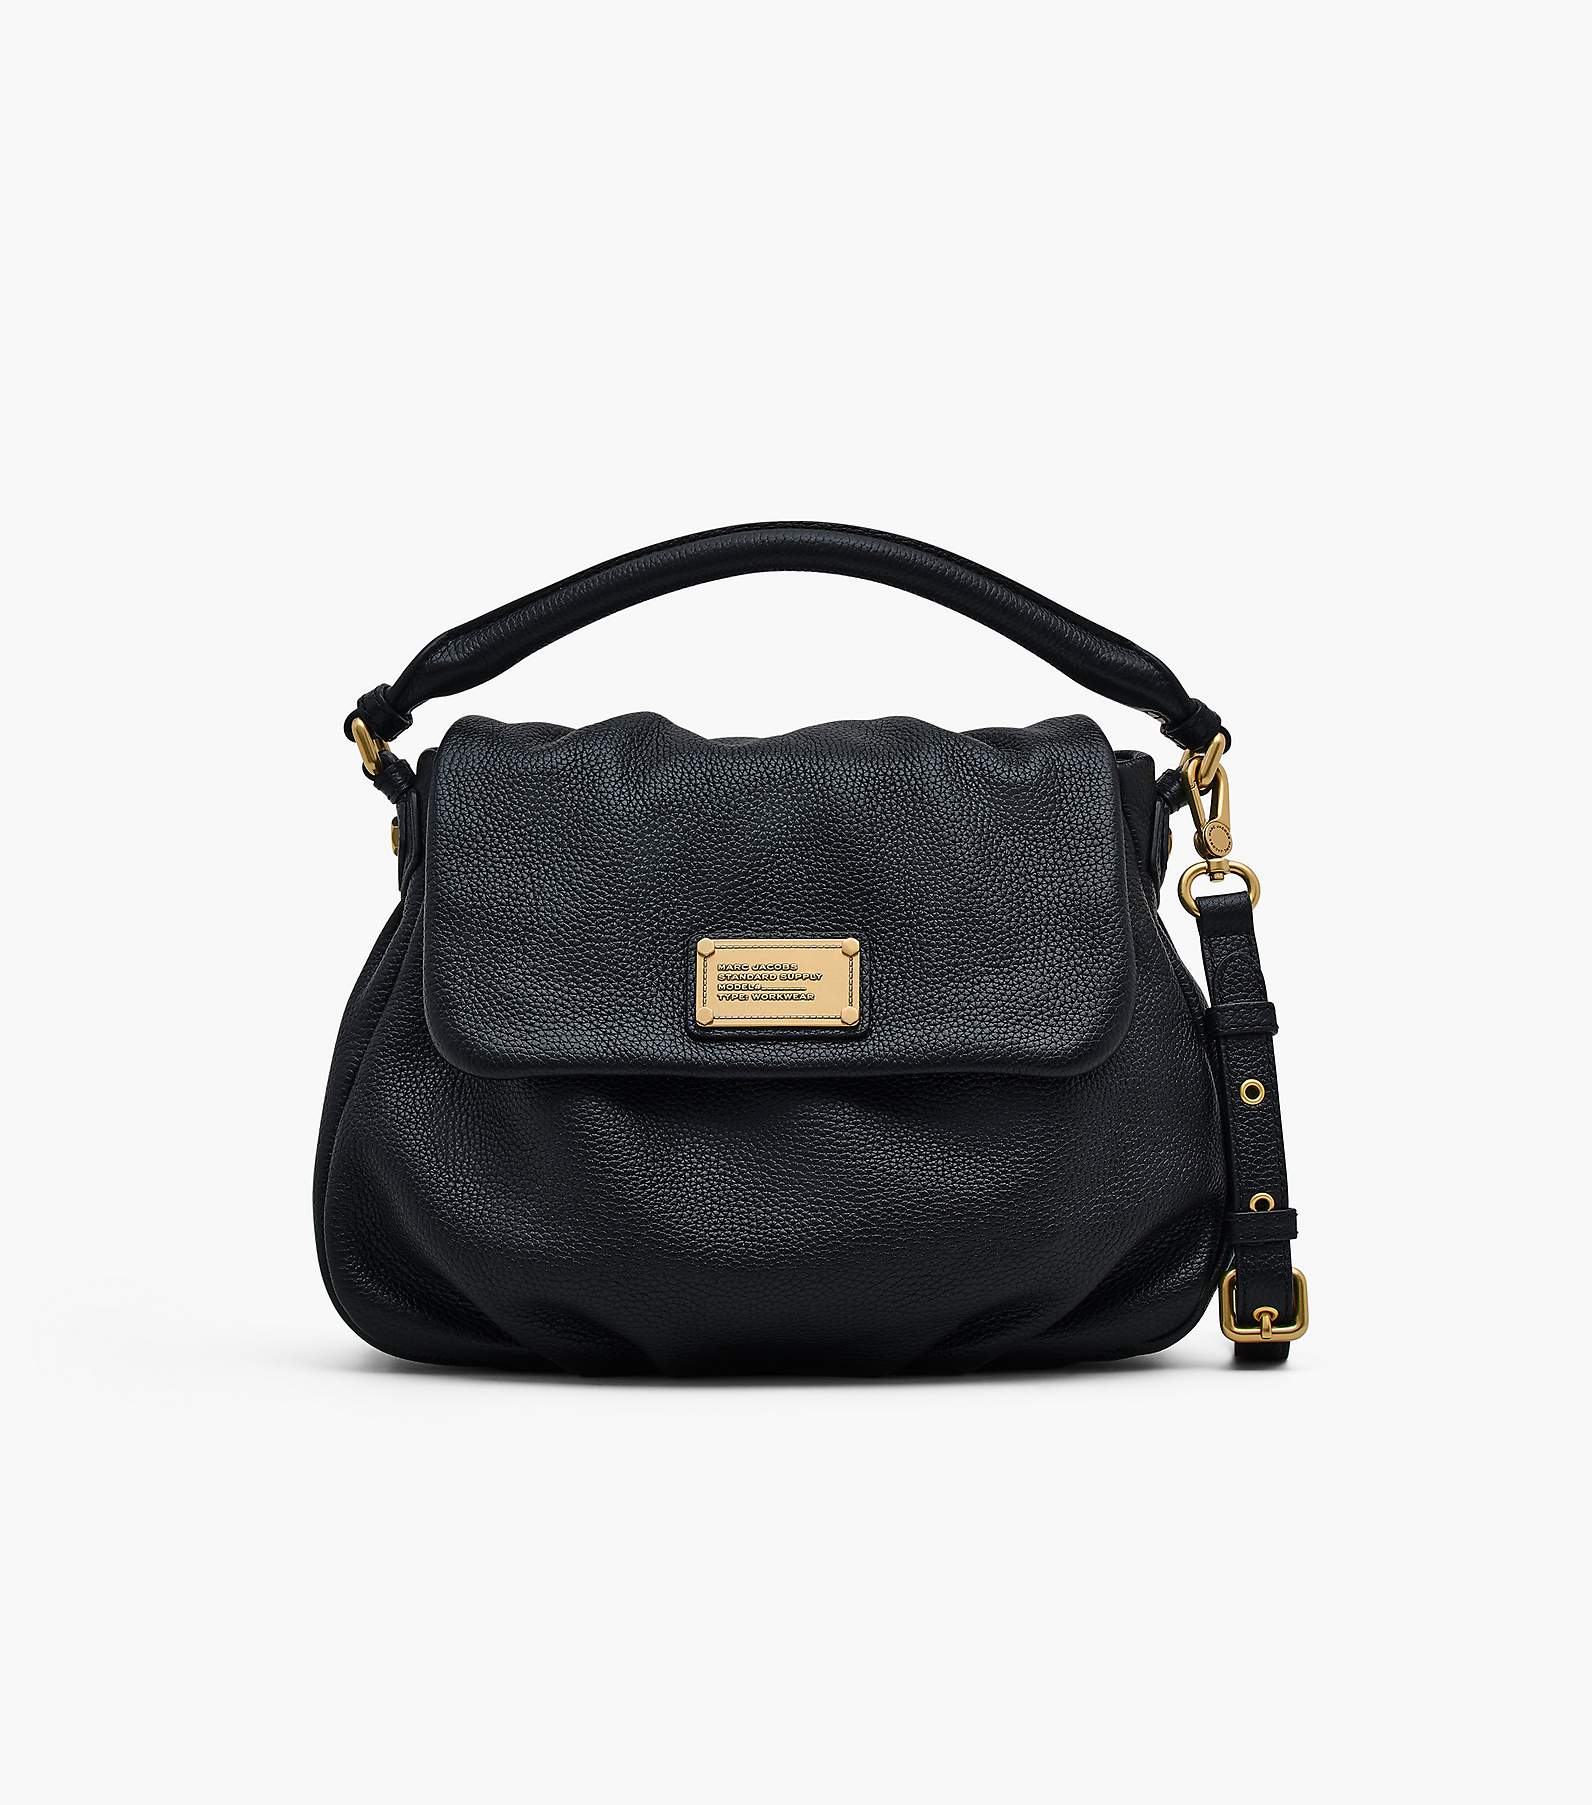 Classic q leather crossbody bag Marc by Marc Jacobs Black in